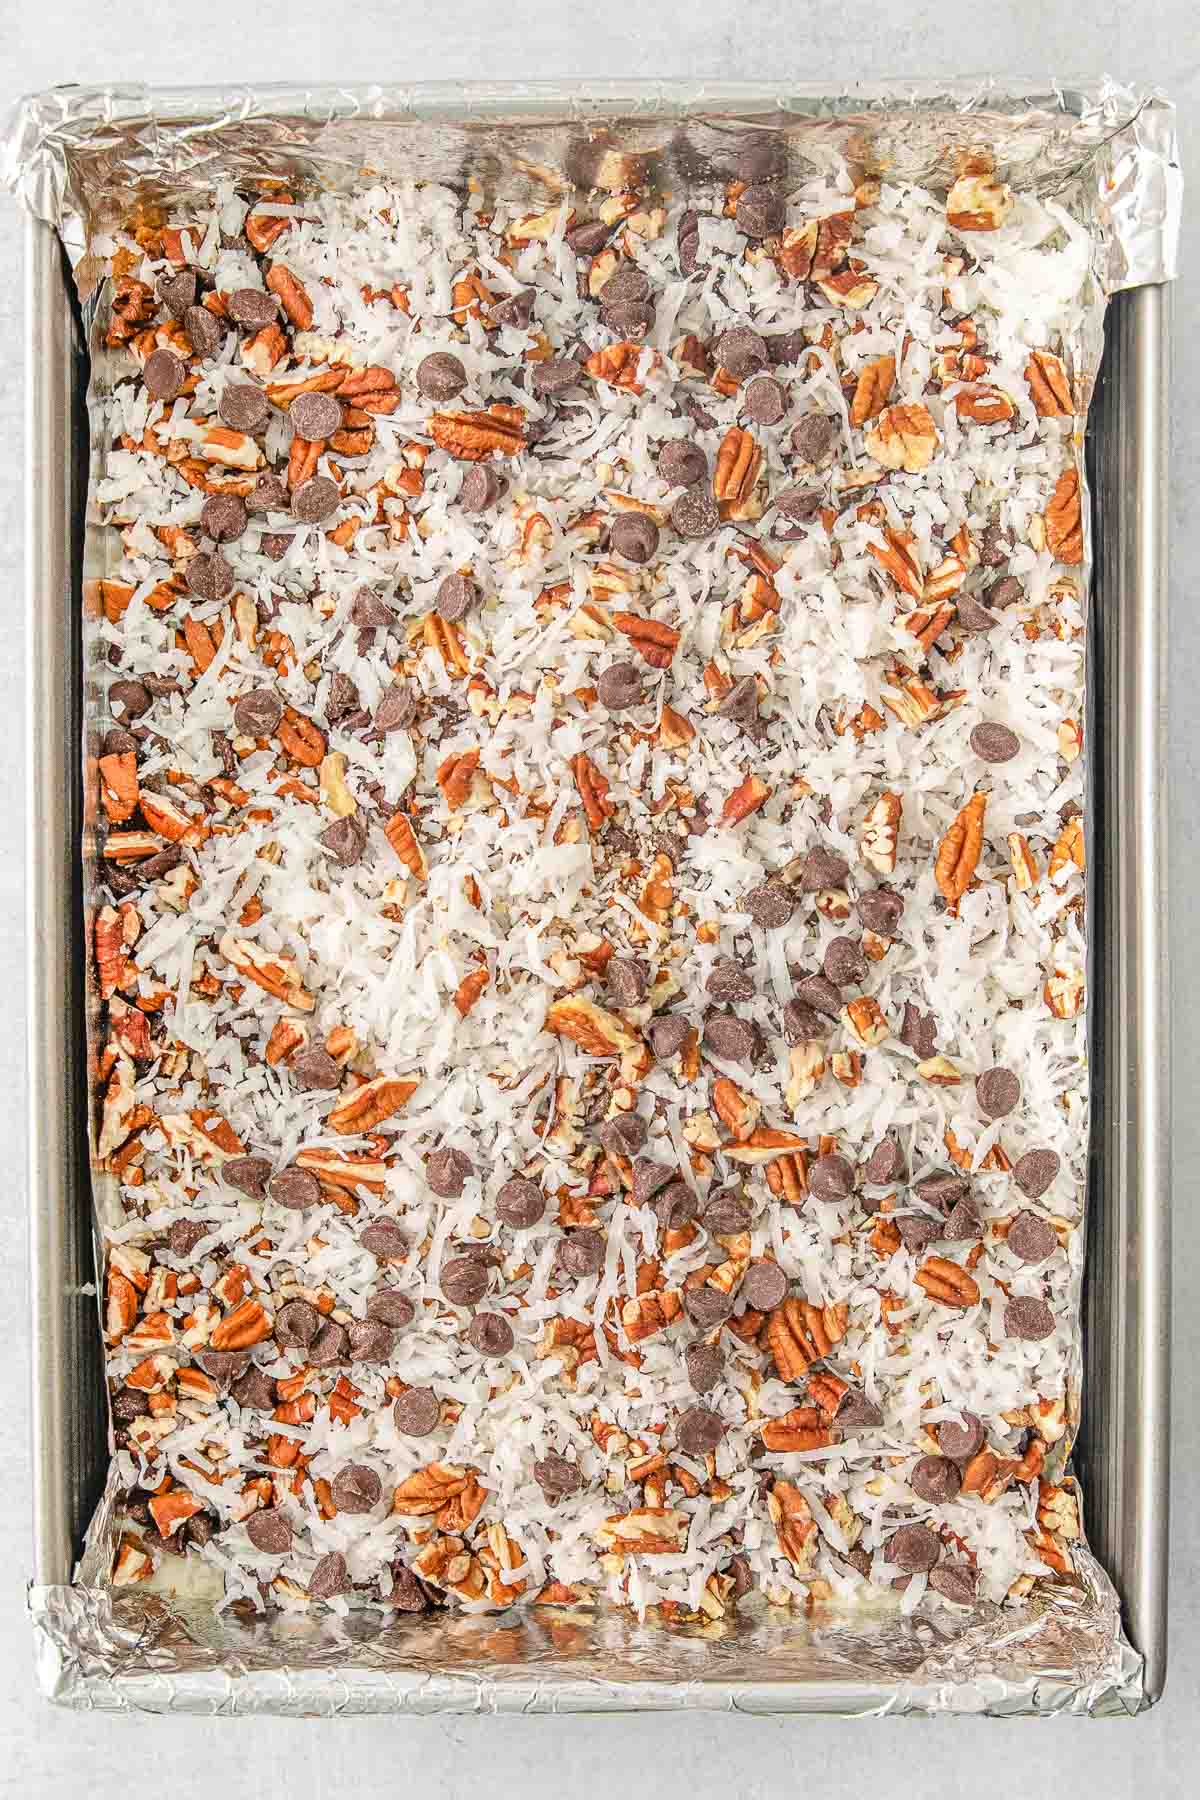 Baking sheet containing uncooked cookie bars.